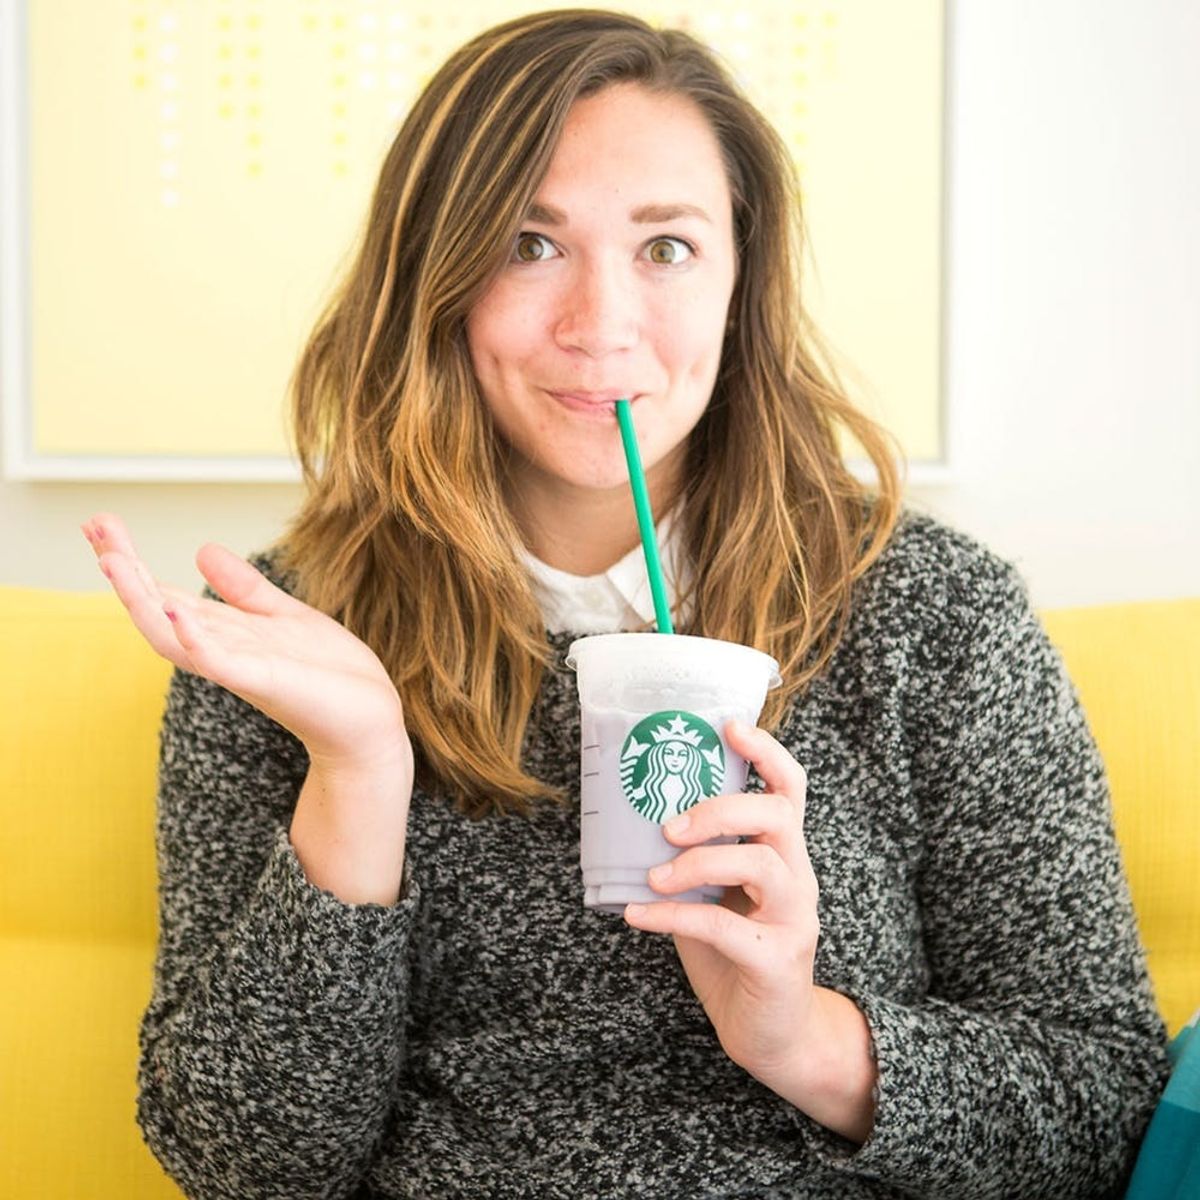 We Tried Starbucks’ Secret Purple Drink and It Changed Our Coffee Order Forever